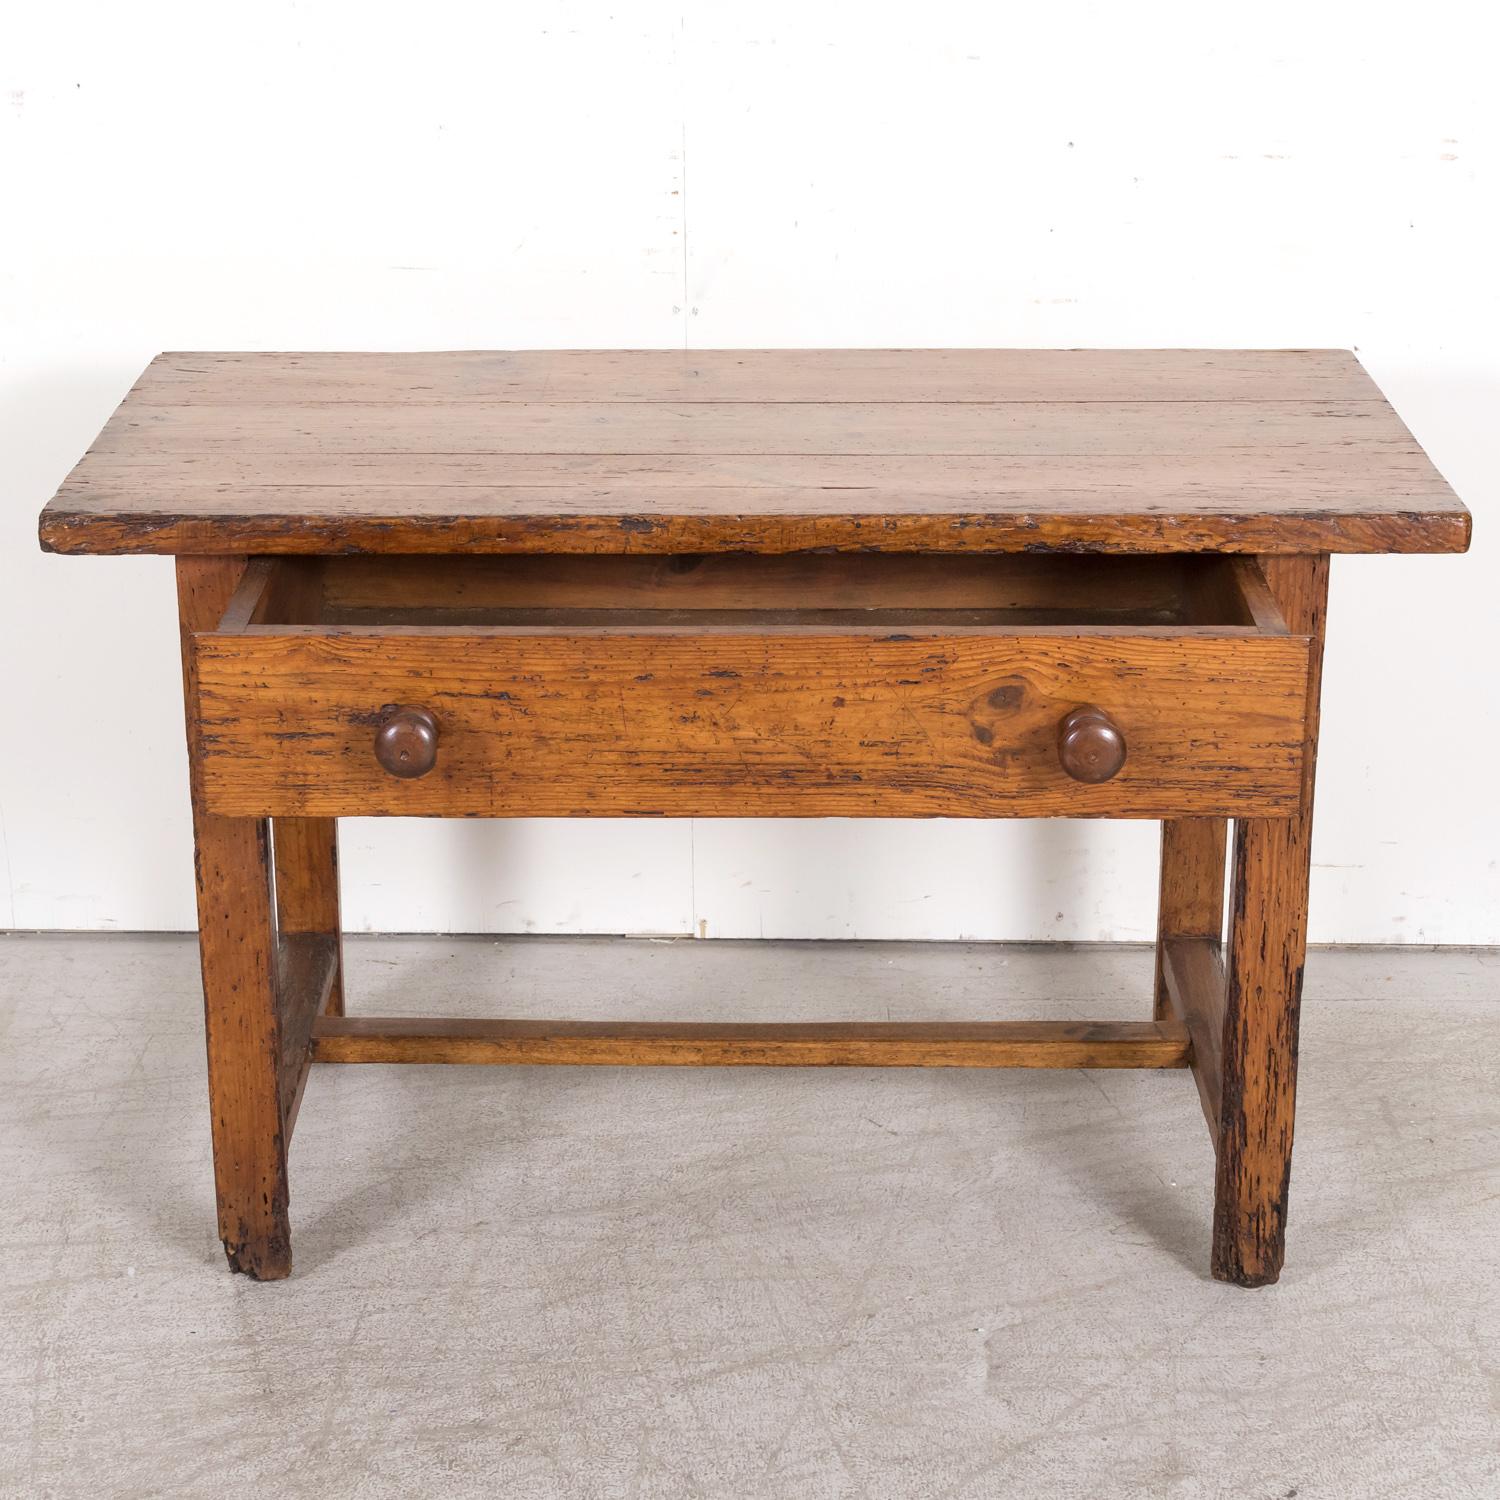 18th Century French Provincial Primitive Larch Wood Side Table or Desk with Draw For Sale 1